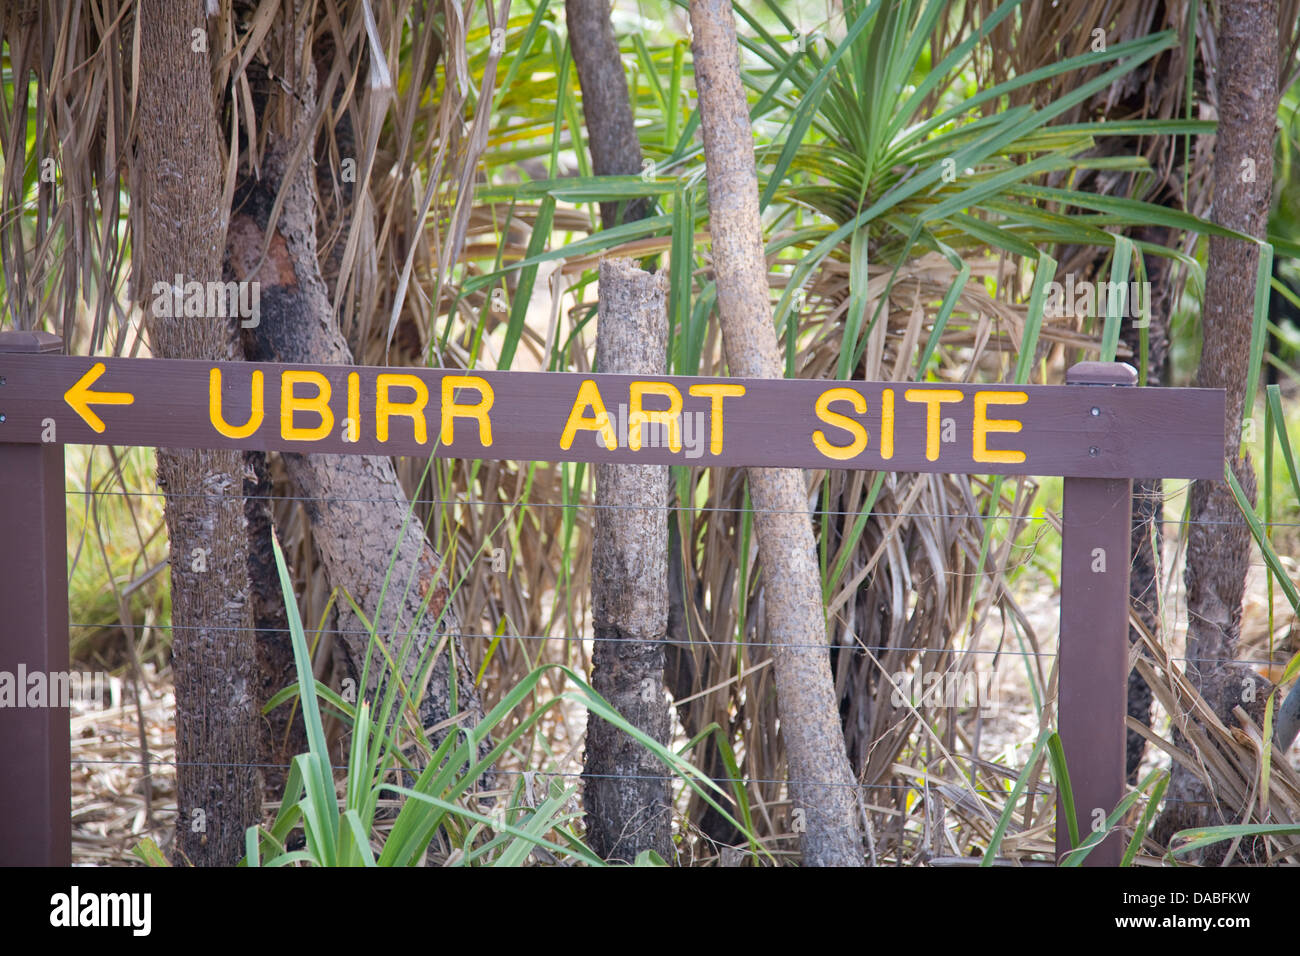 Ubirr art site in Kakadu national park,Northern Territory, Australia, wooden sign provides directions to the site Stock Photo